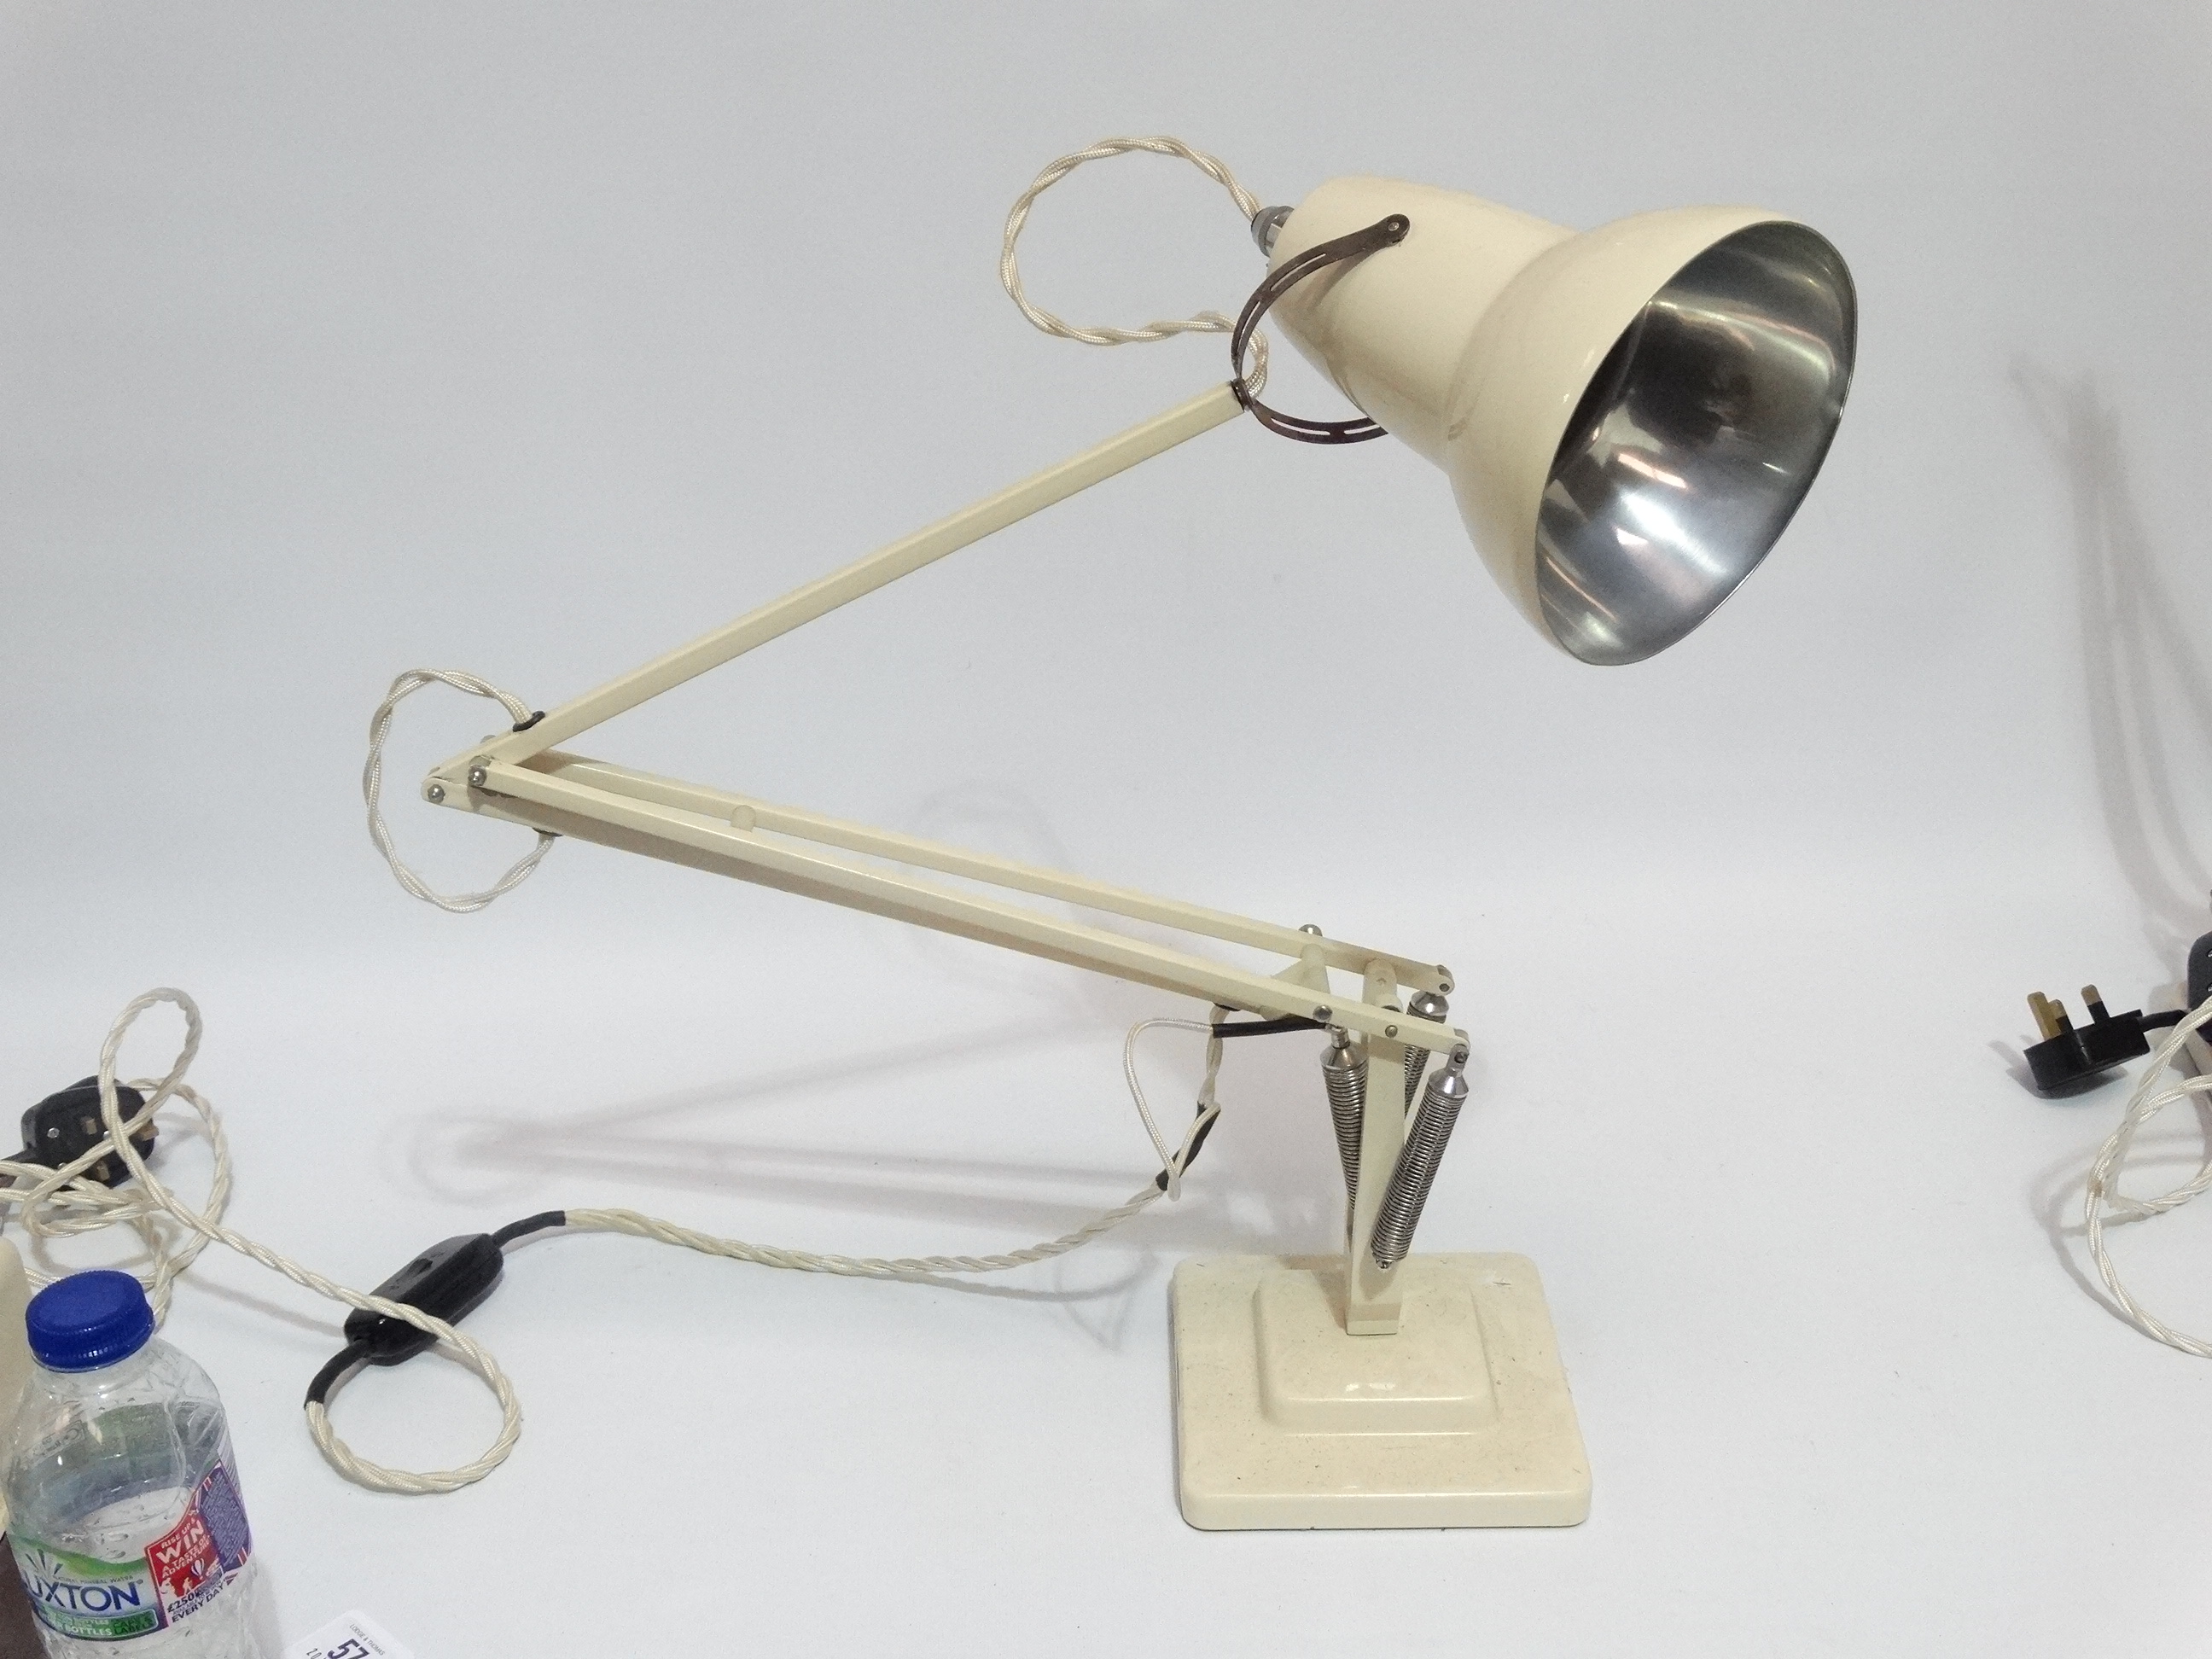 Herbert Terry anglepoise lamp - with cream painted finish and square stepped base. - Image 2 of 4